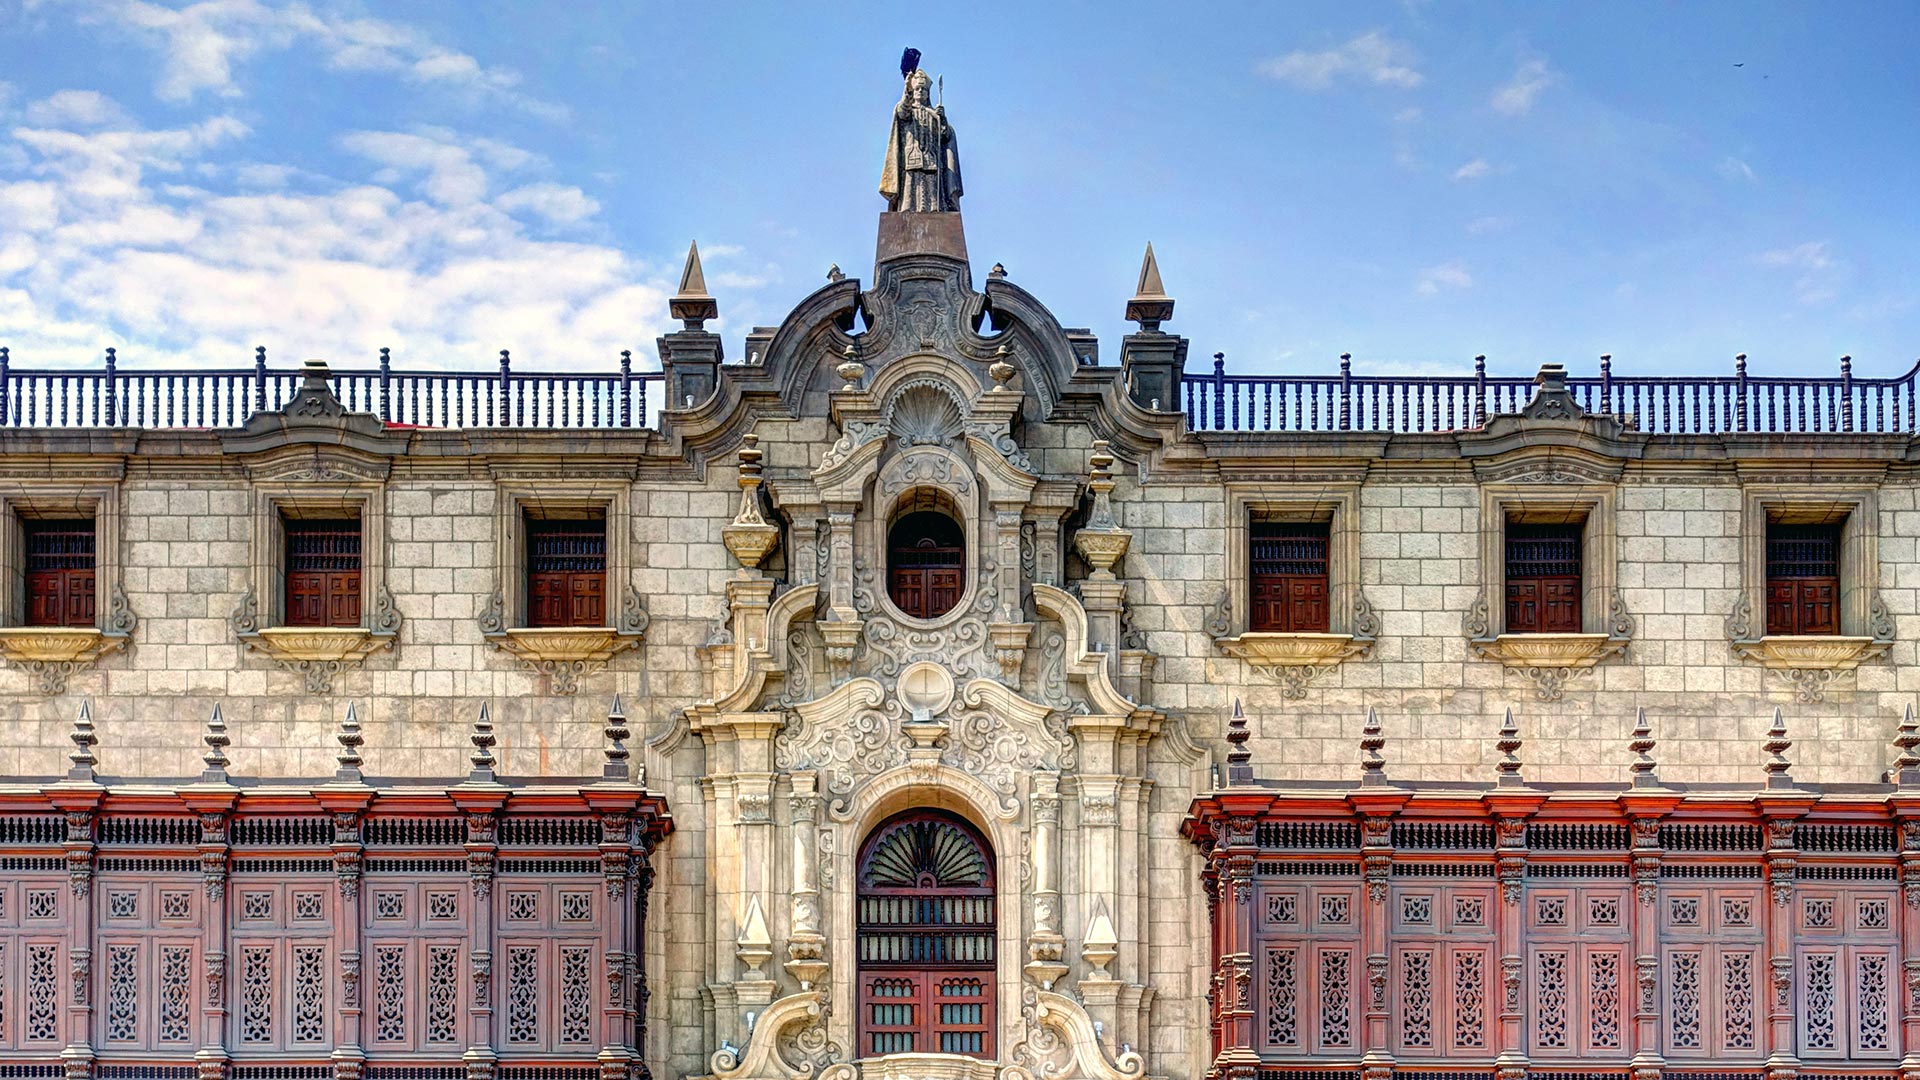 The exterior of an ornate building in Lima, Peru